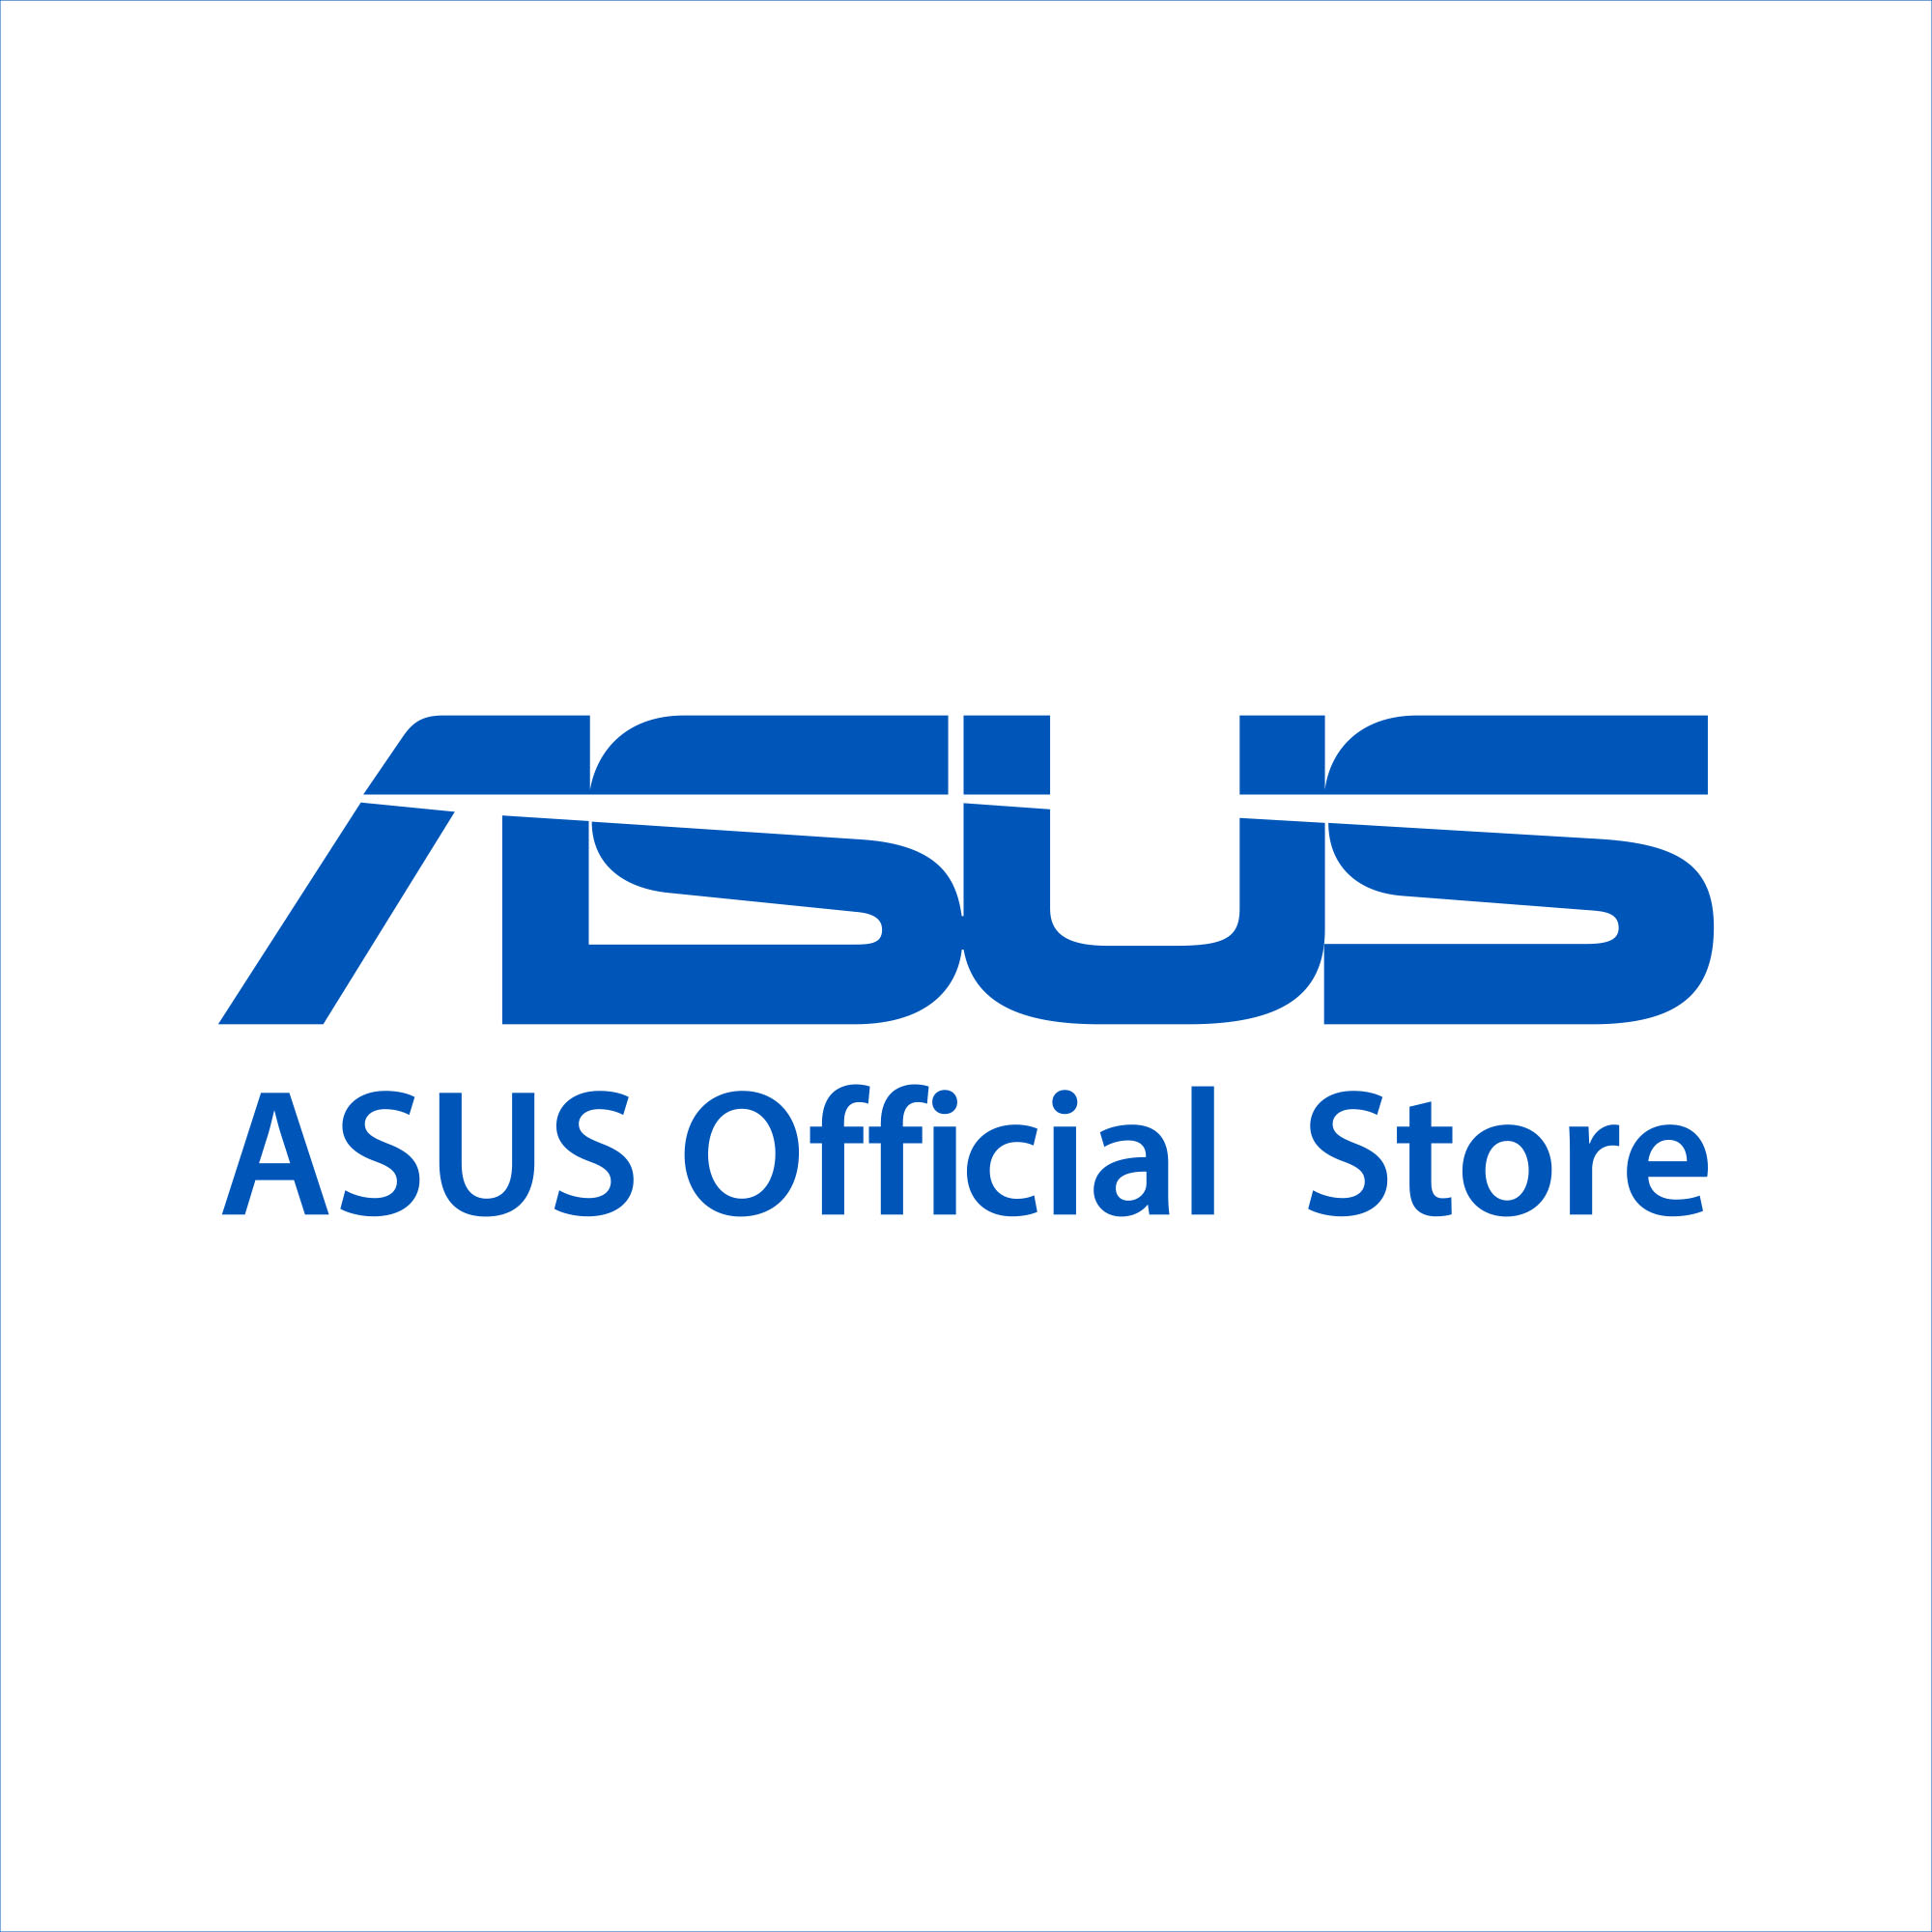 ASUS Component Official Store